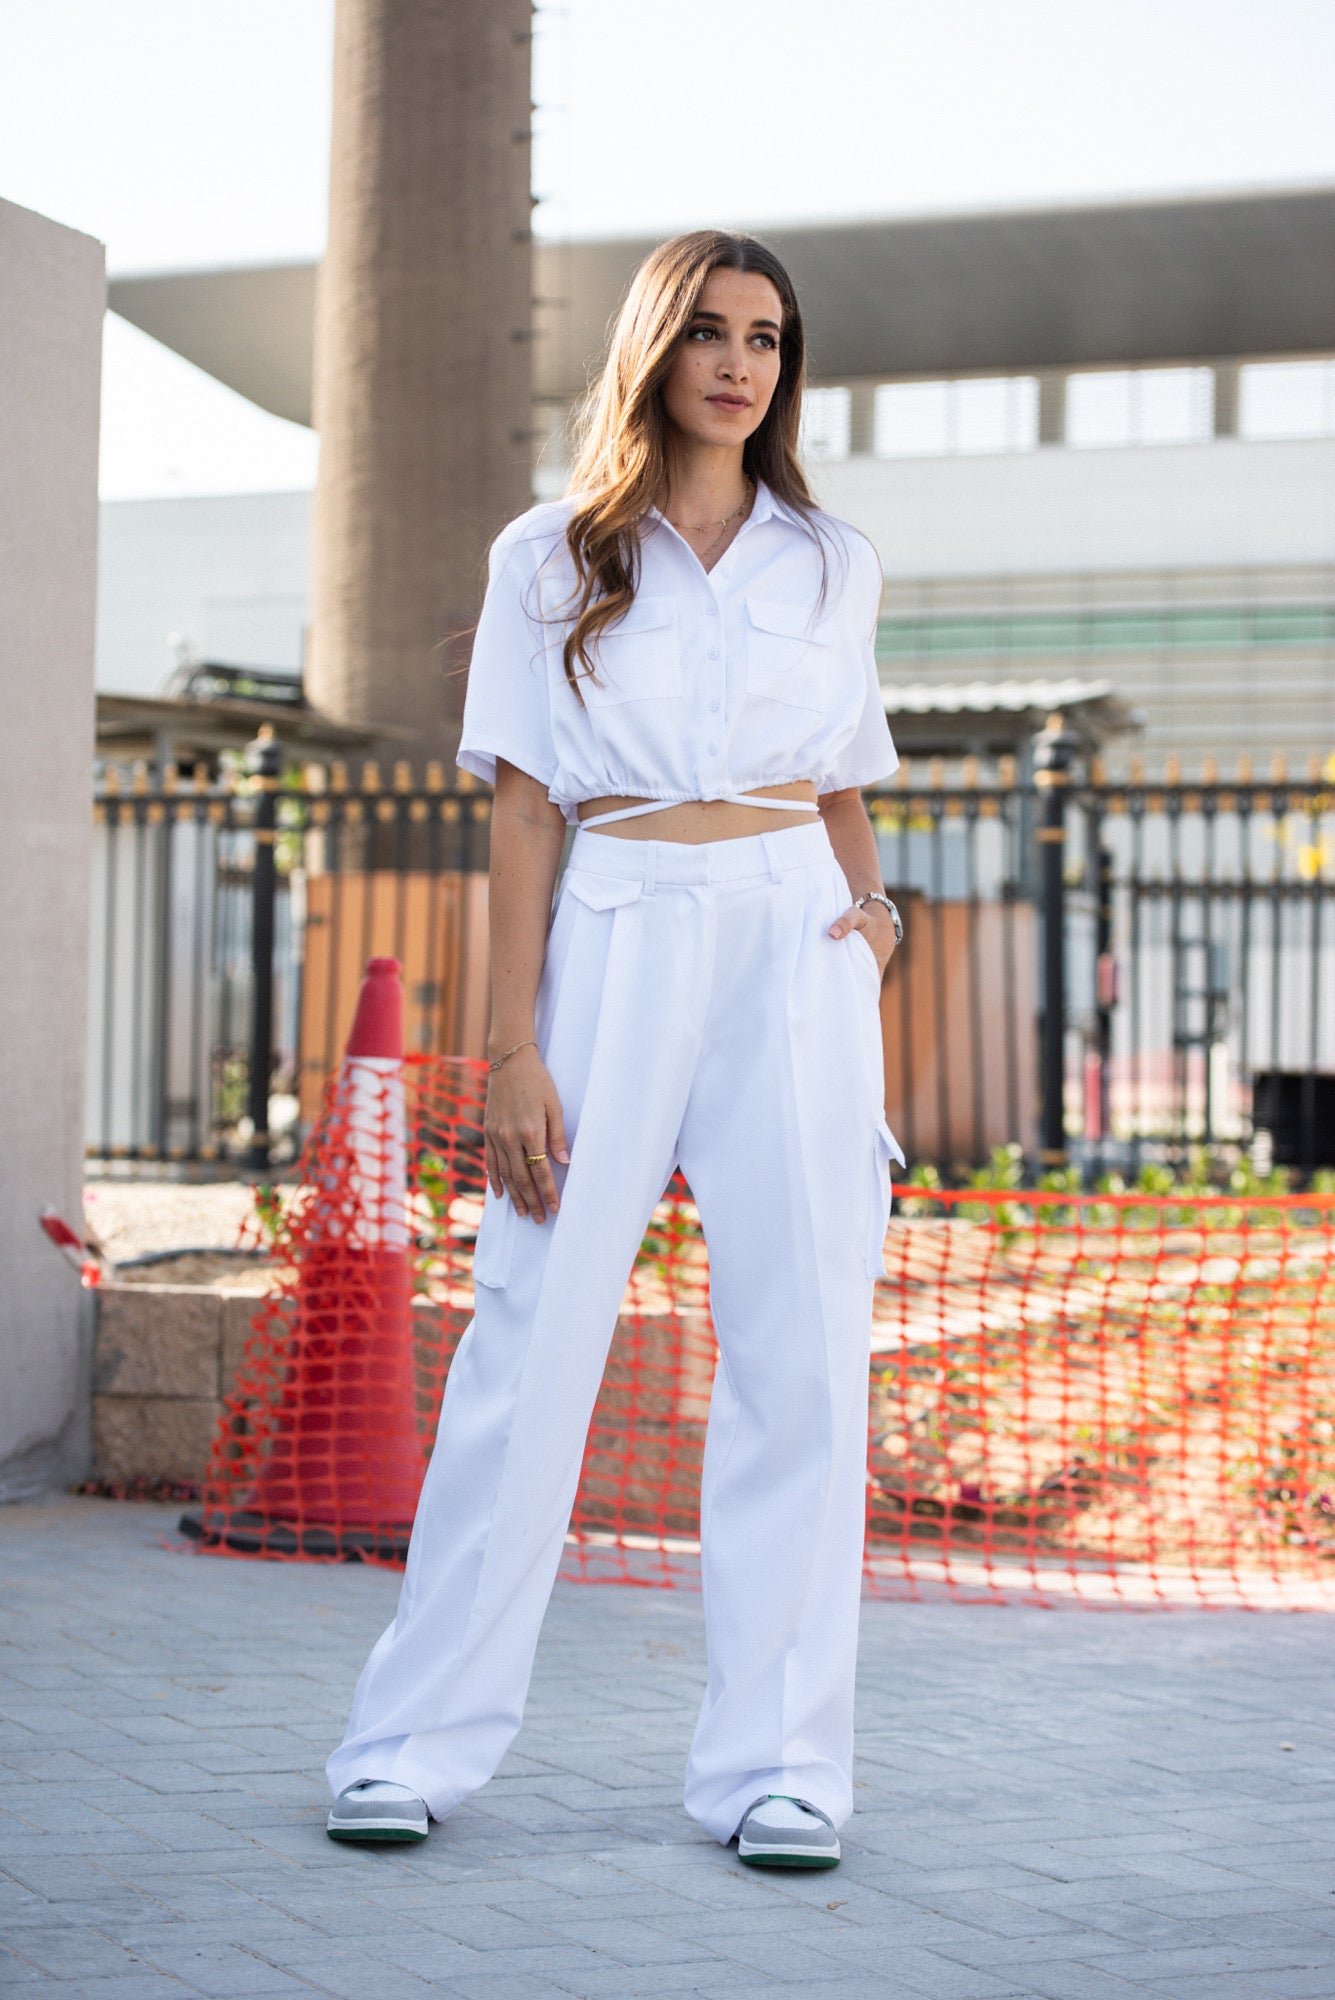 outfit-palazzo-pants-beach-style-floppy-hat-white-blouse-new-look-hm-7